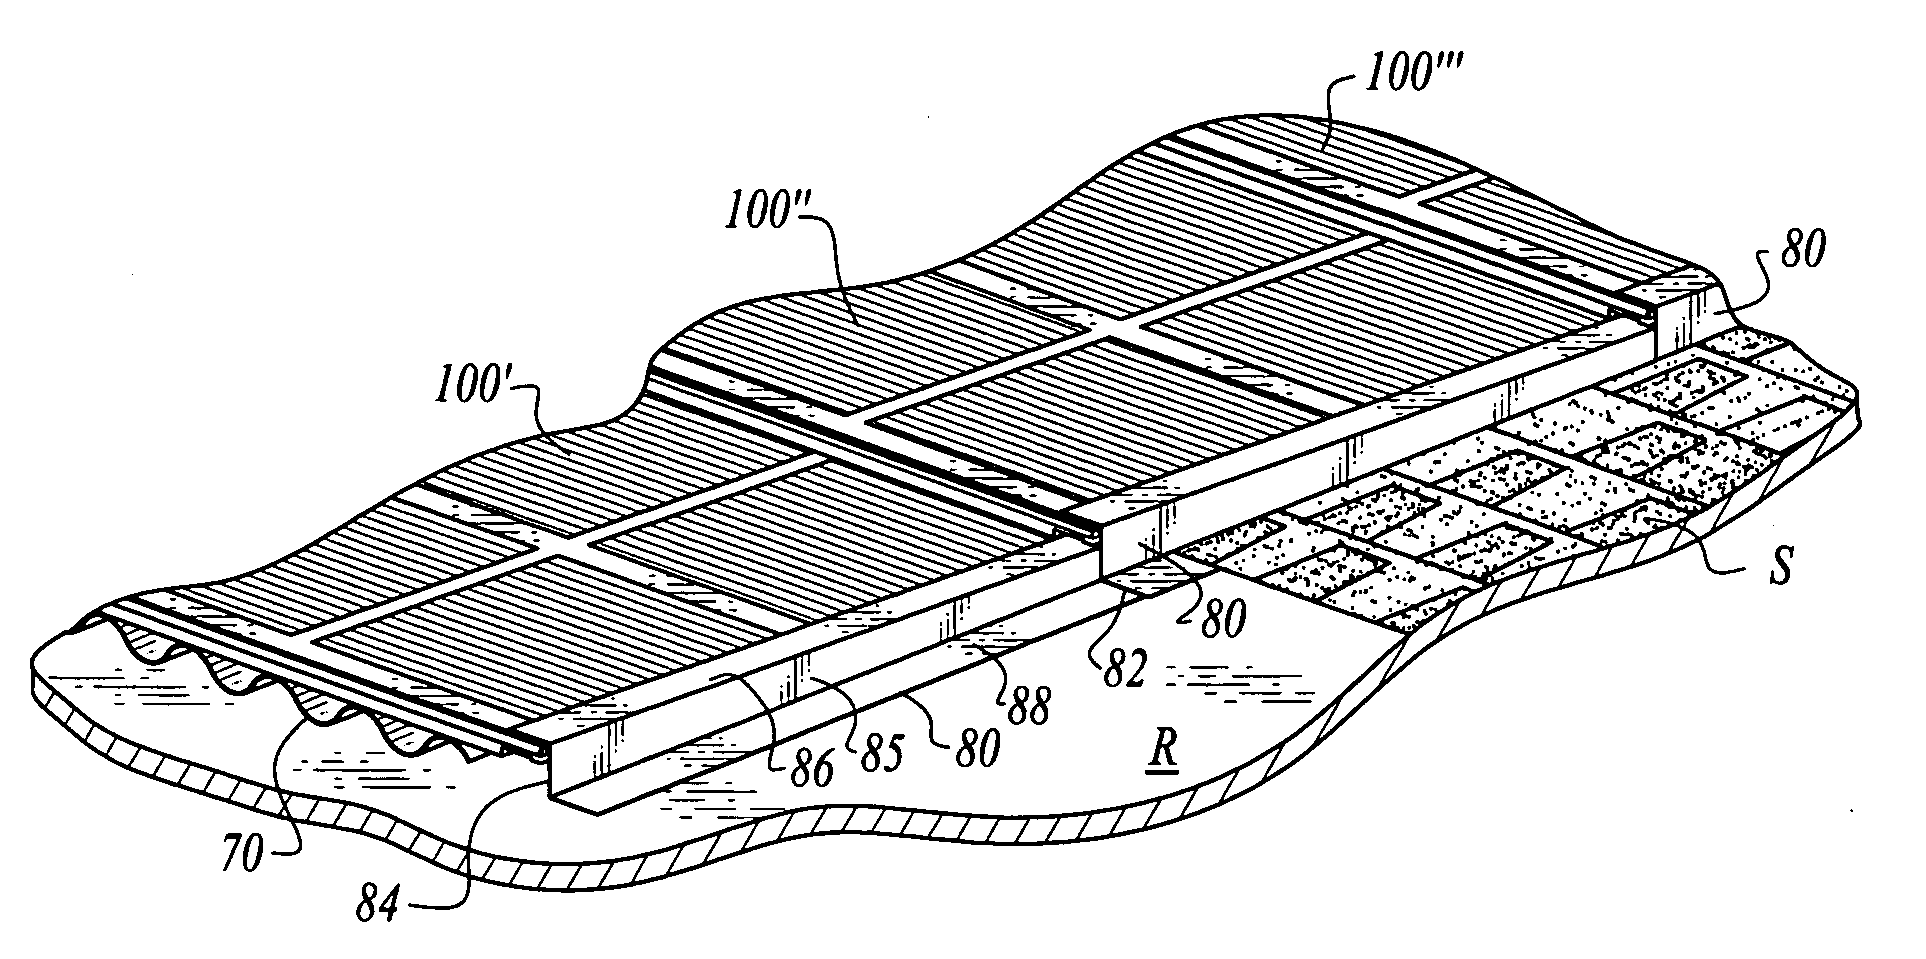 Roof mounting bracket for photovoltaic power generation system